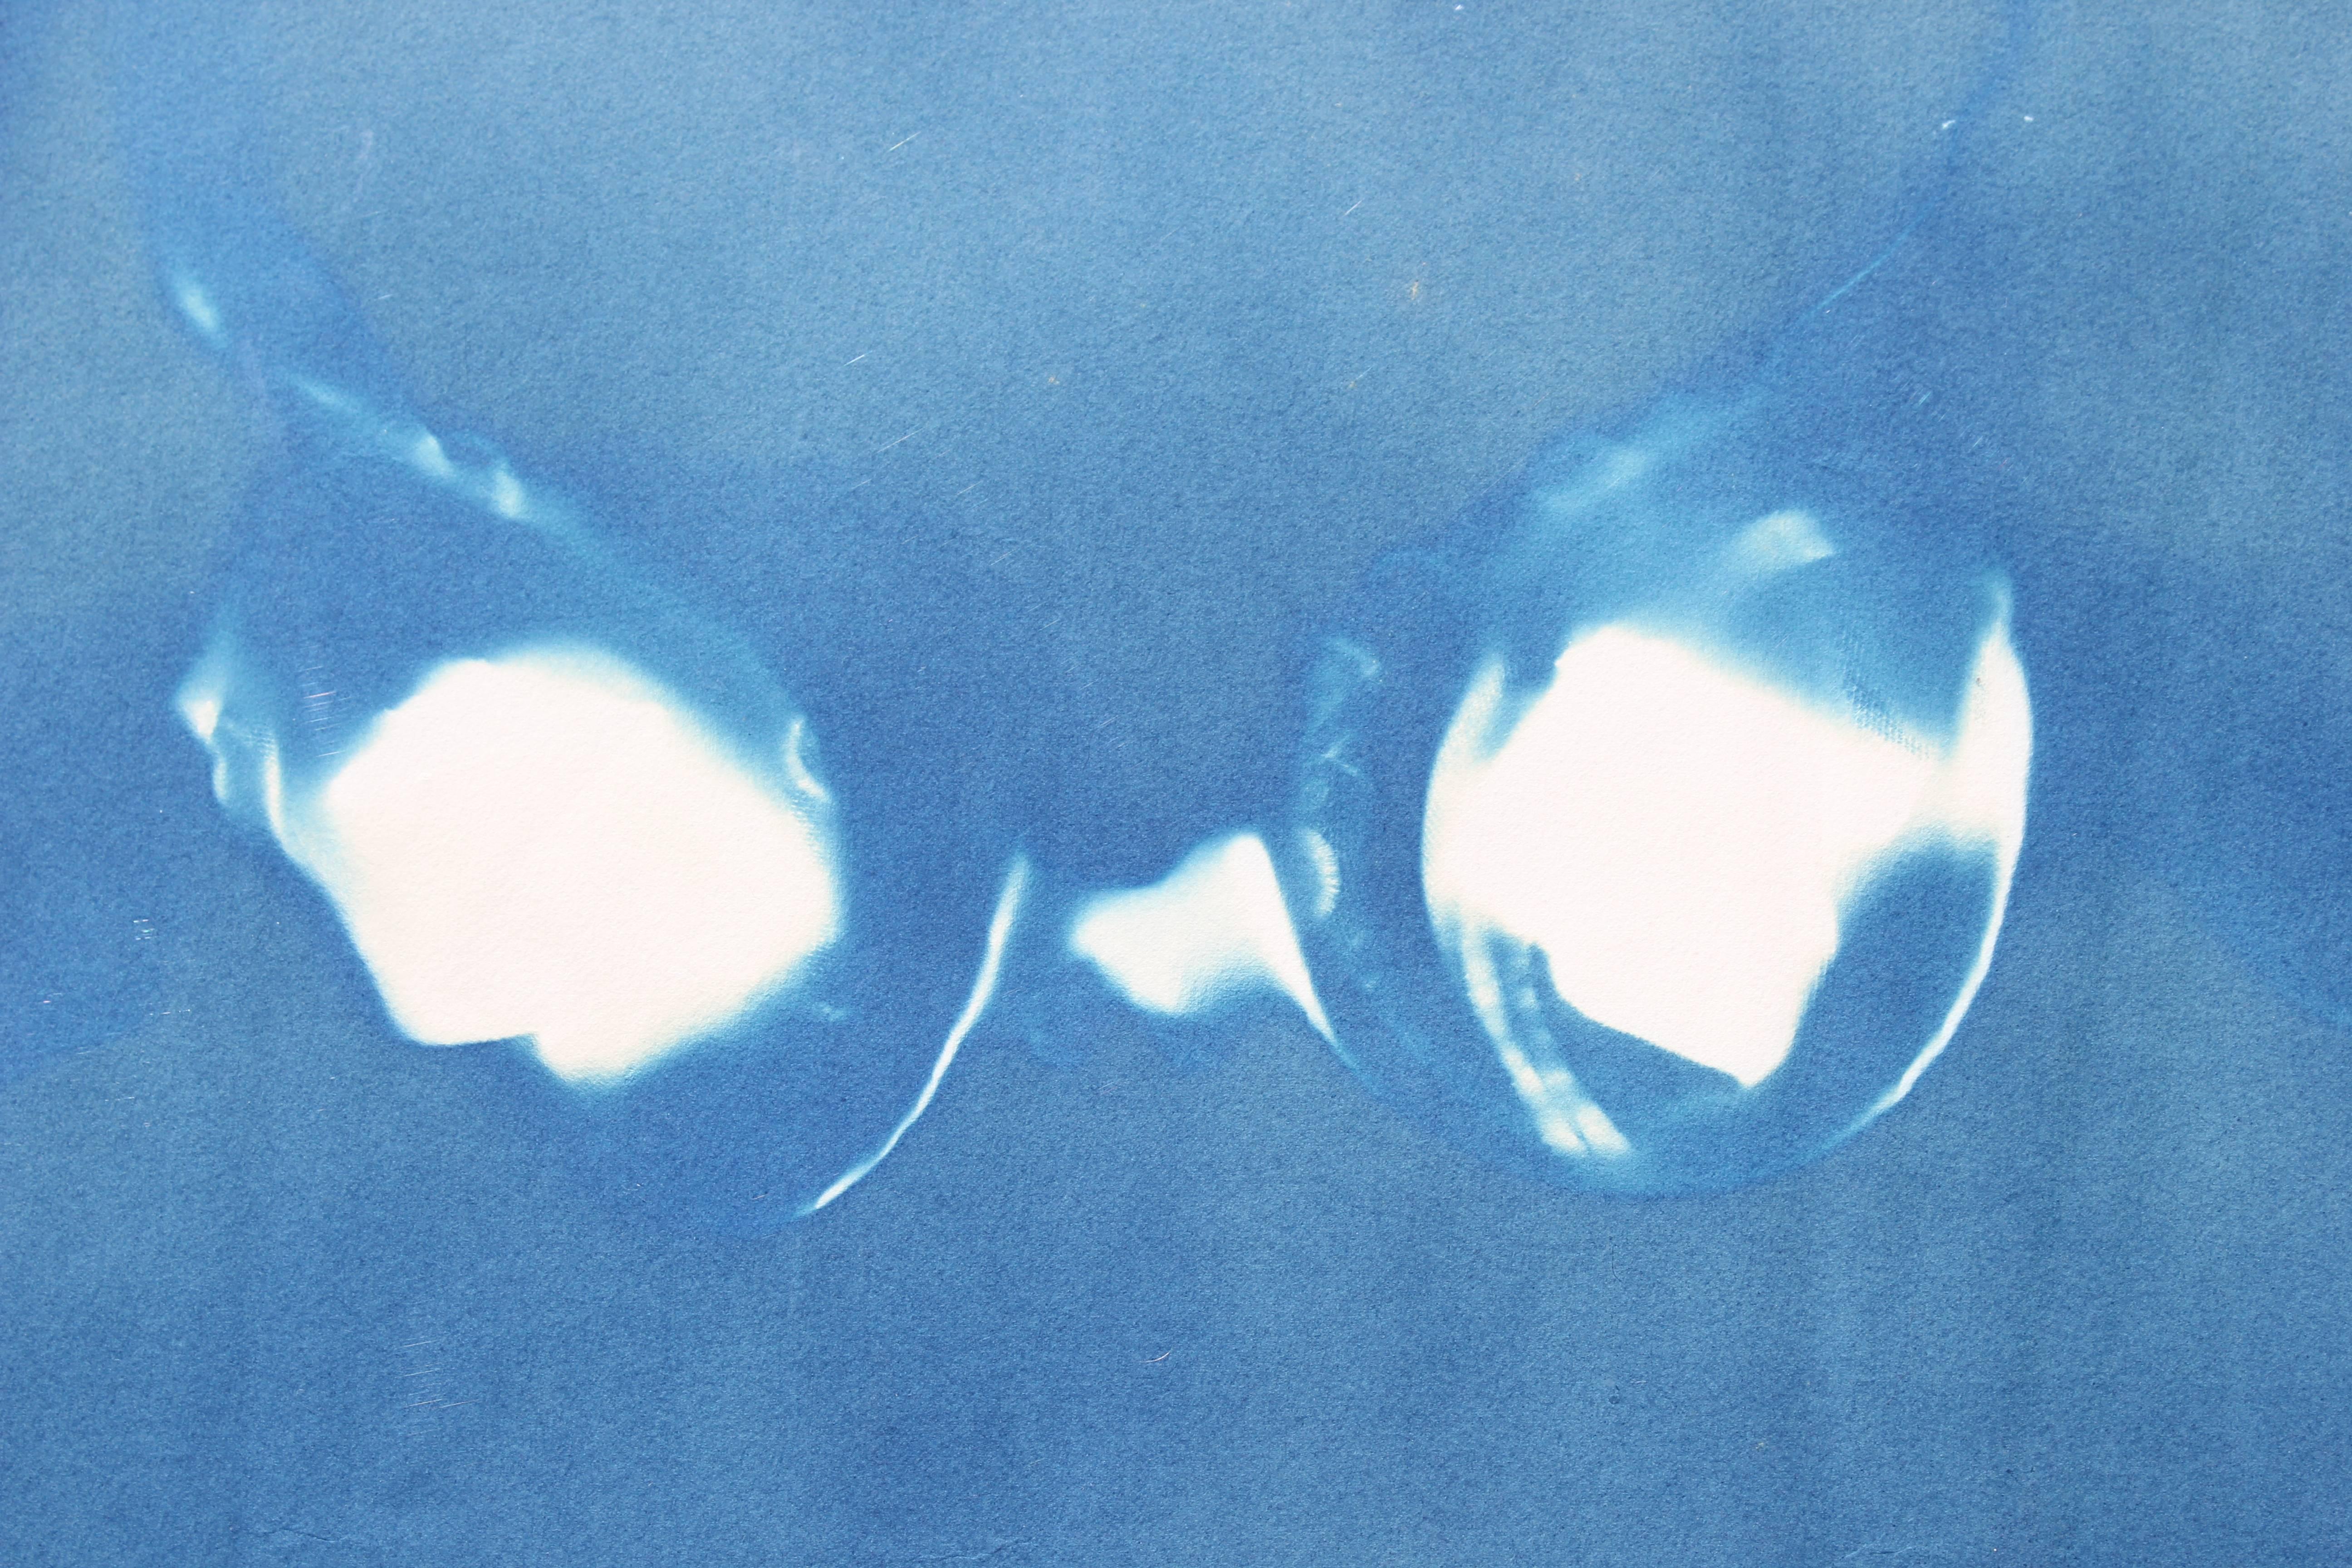 Blue Cyanotype Photogram of Woman's Garments - Photograph by Unknown